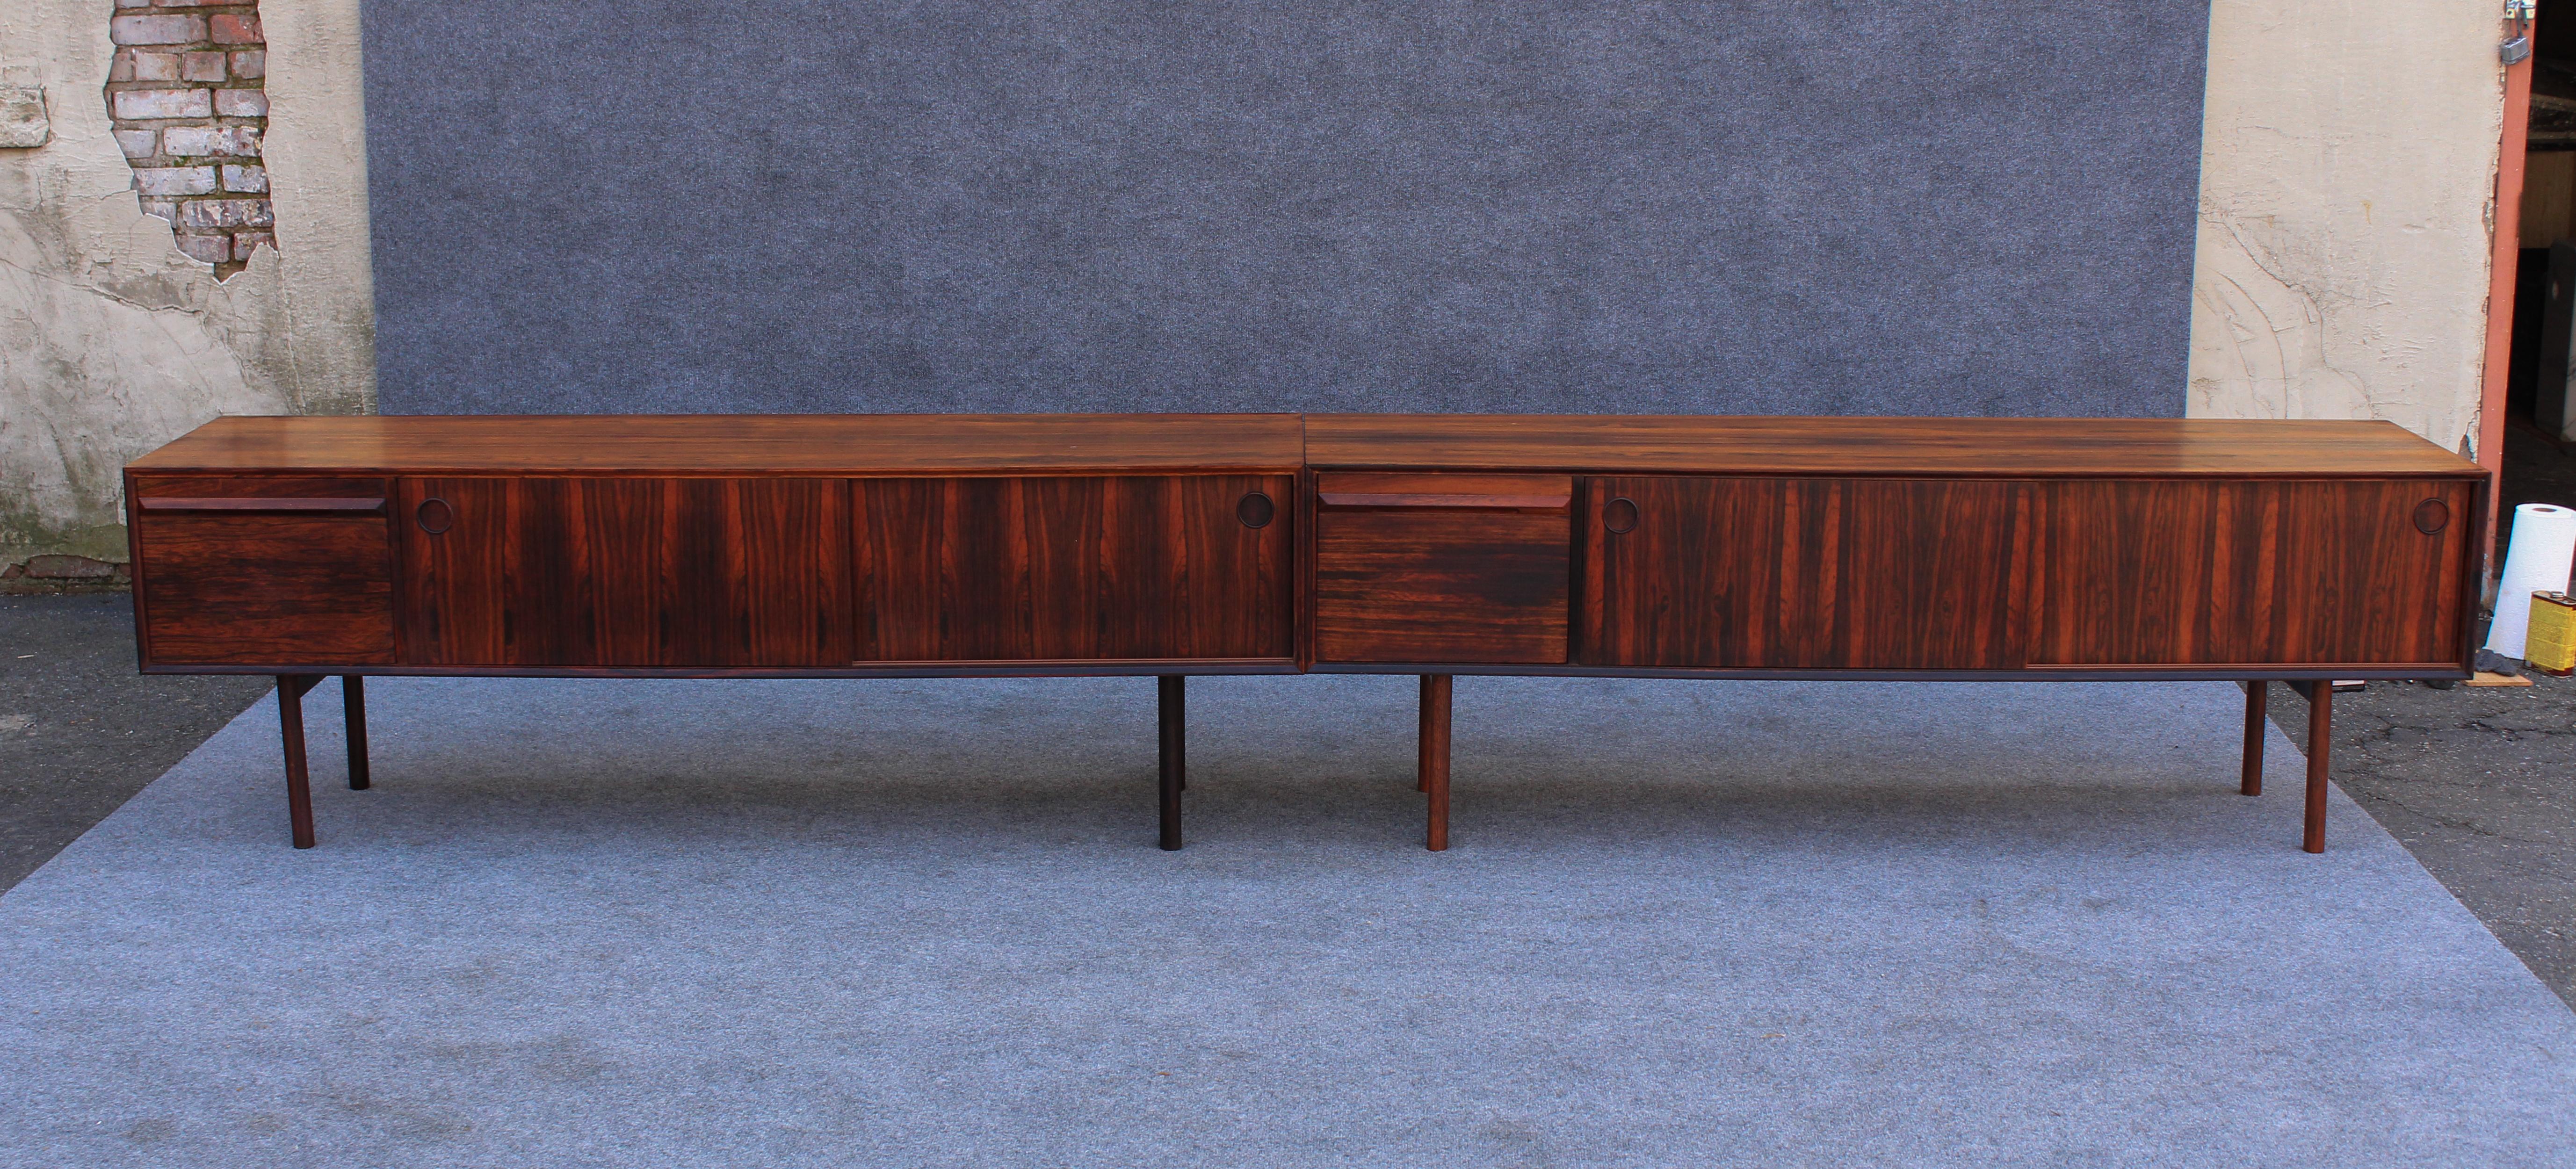 This very rare cabinets were designed in the 1960s by Haug Snekkeri for Danish furniture maker Bruksbo. There were likely only a few hundred ever made, and we have a matching pair. Almost certainly a custom order, these have bookmatched rosewood